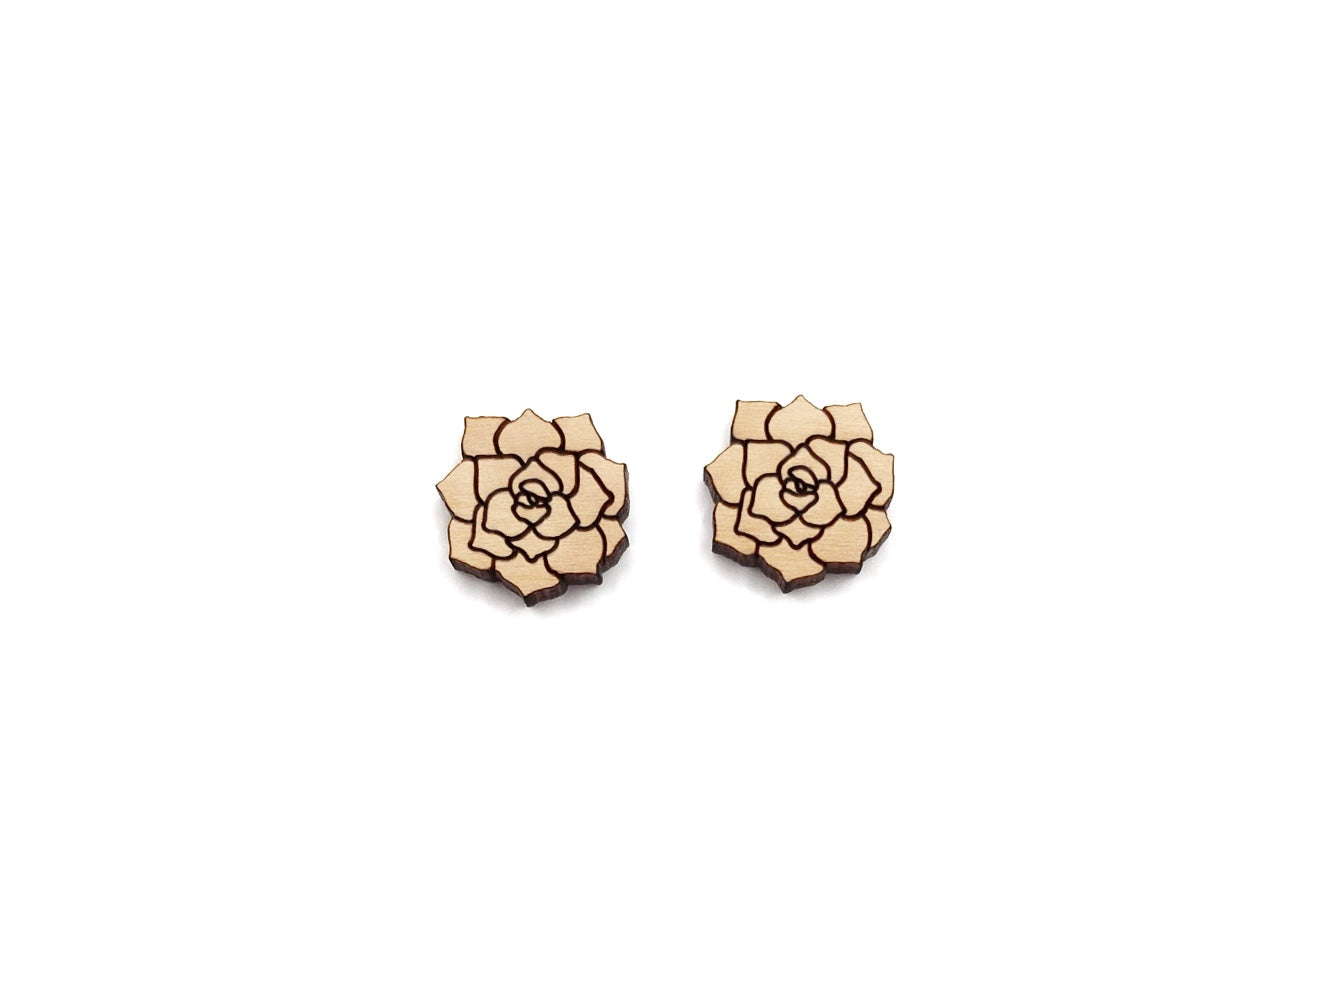 a pair of wooden earrings with a flower design